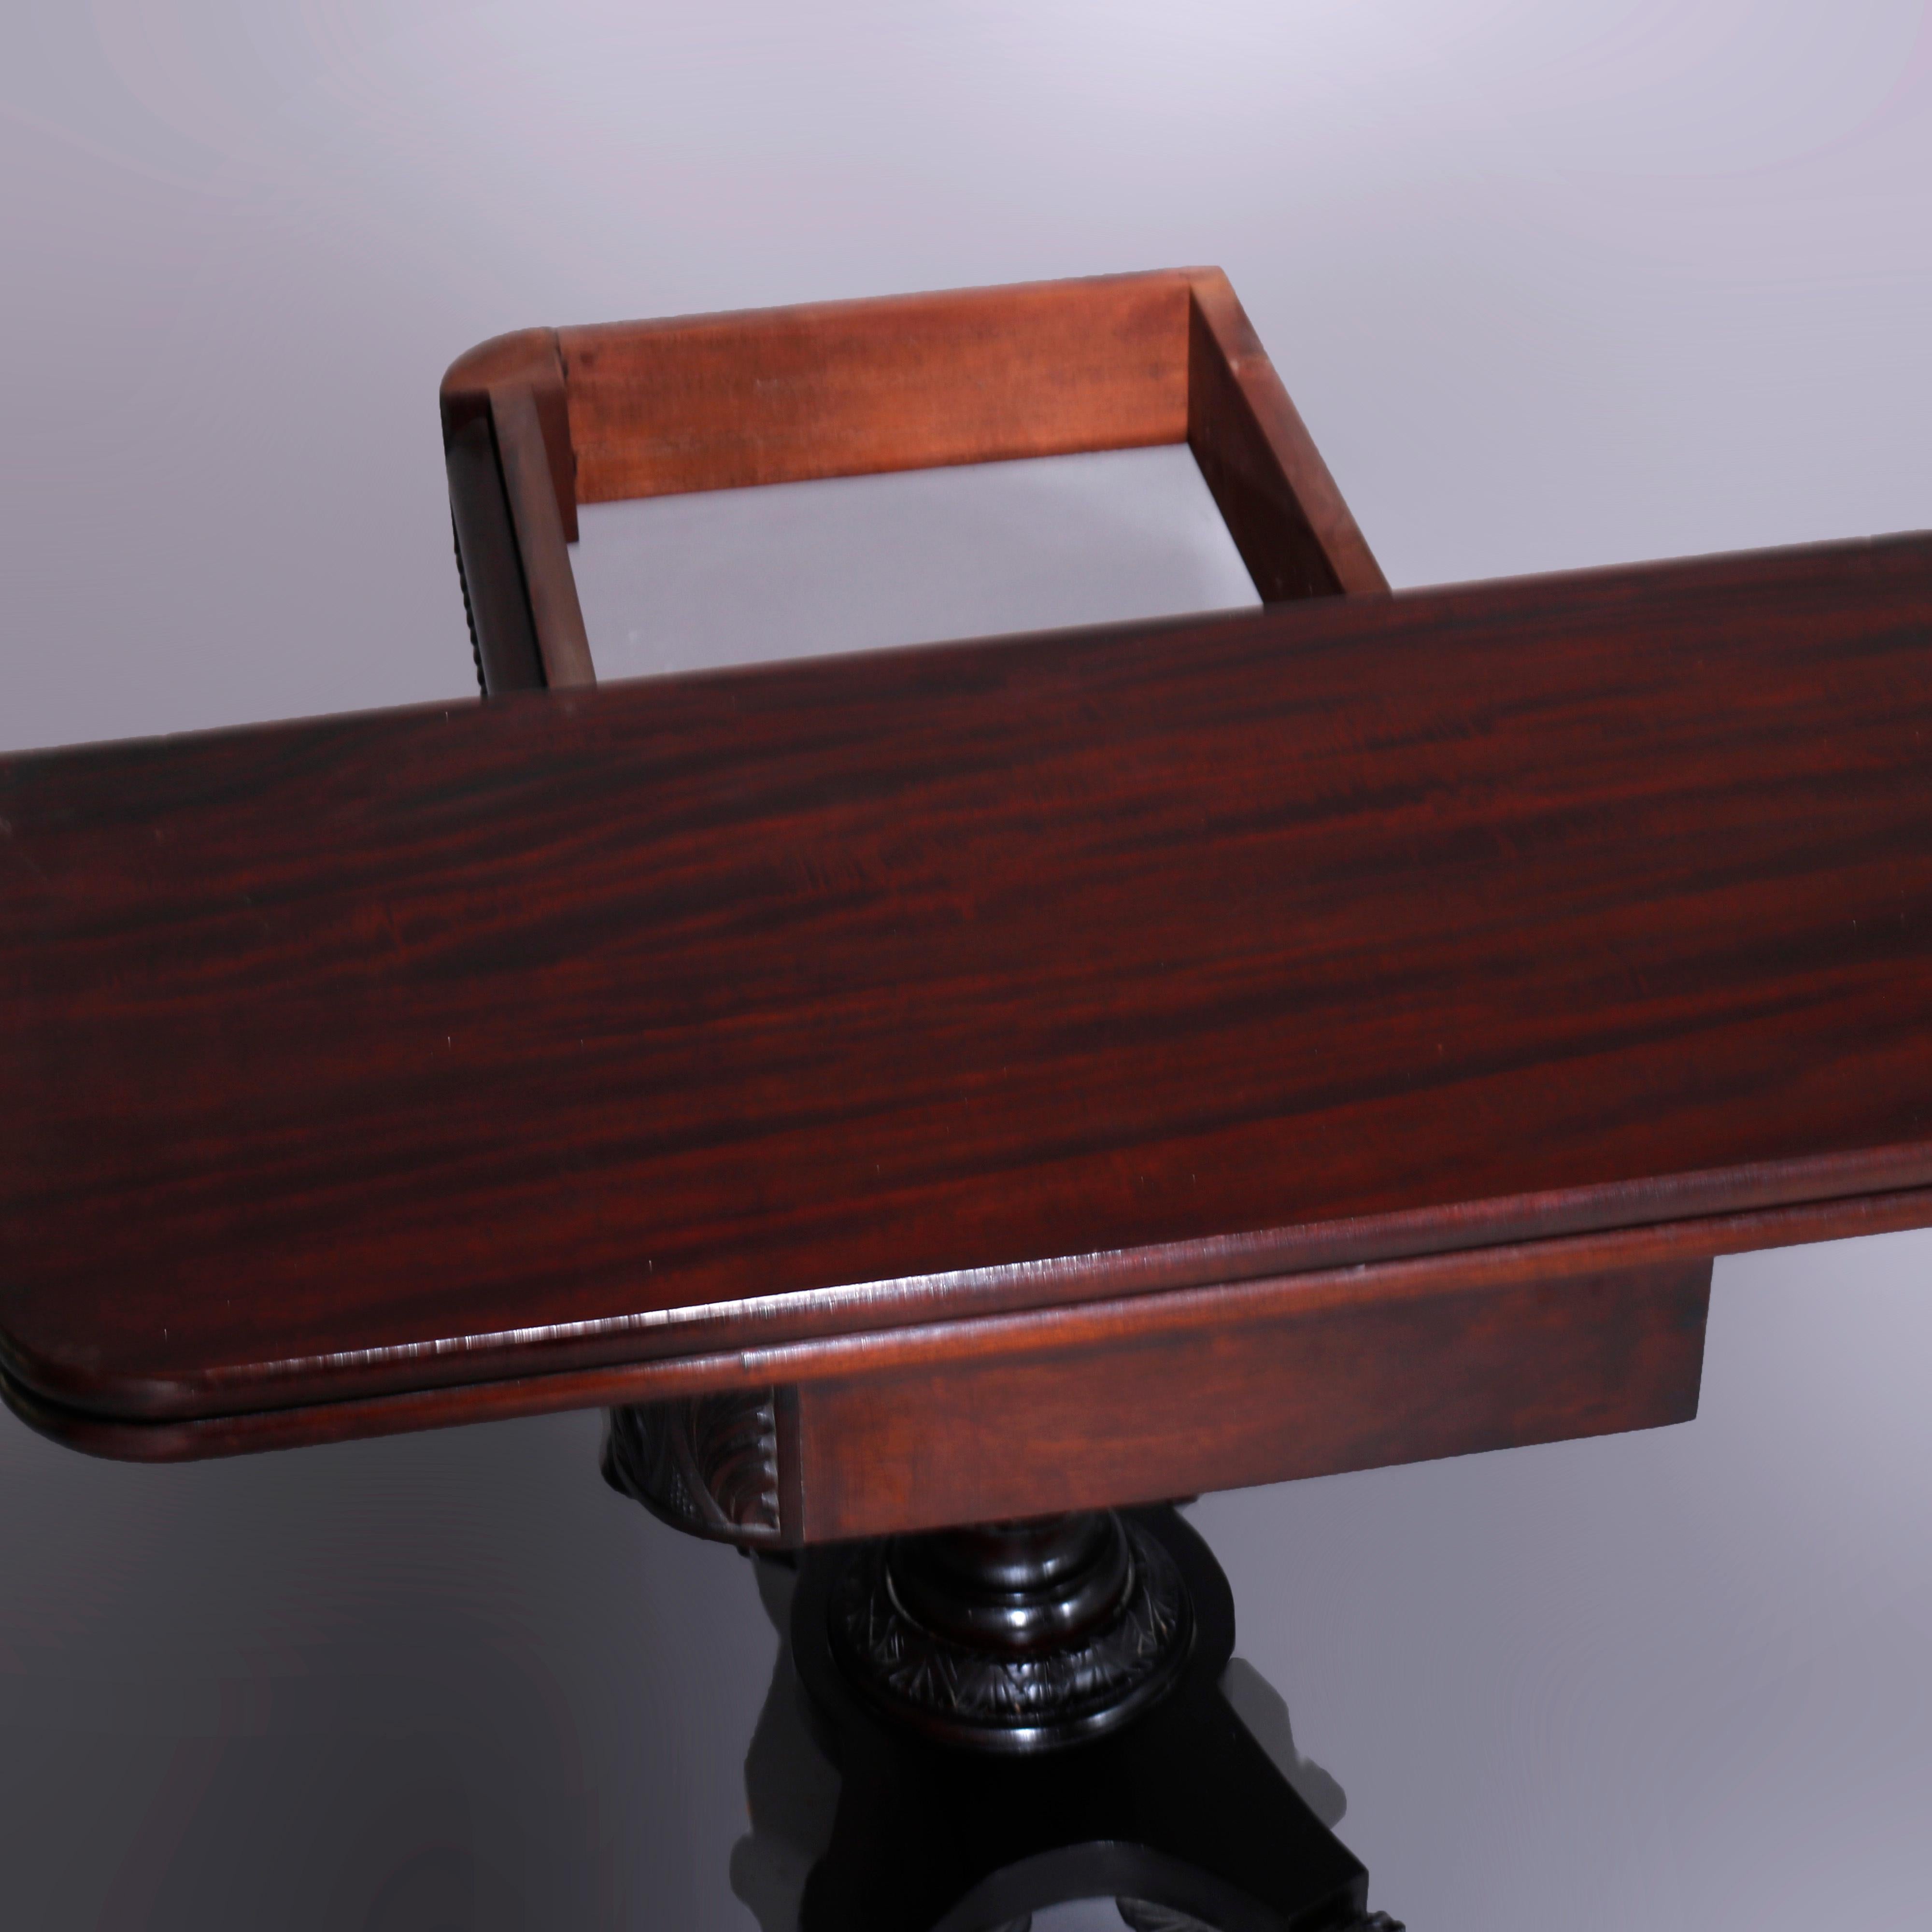 19th Century Antique American Empire Classical Carved Mahogany Claw Foot Card Table c1840